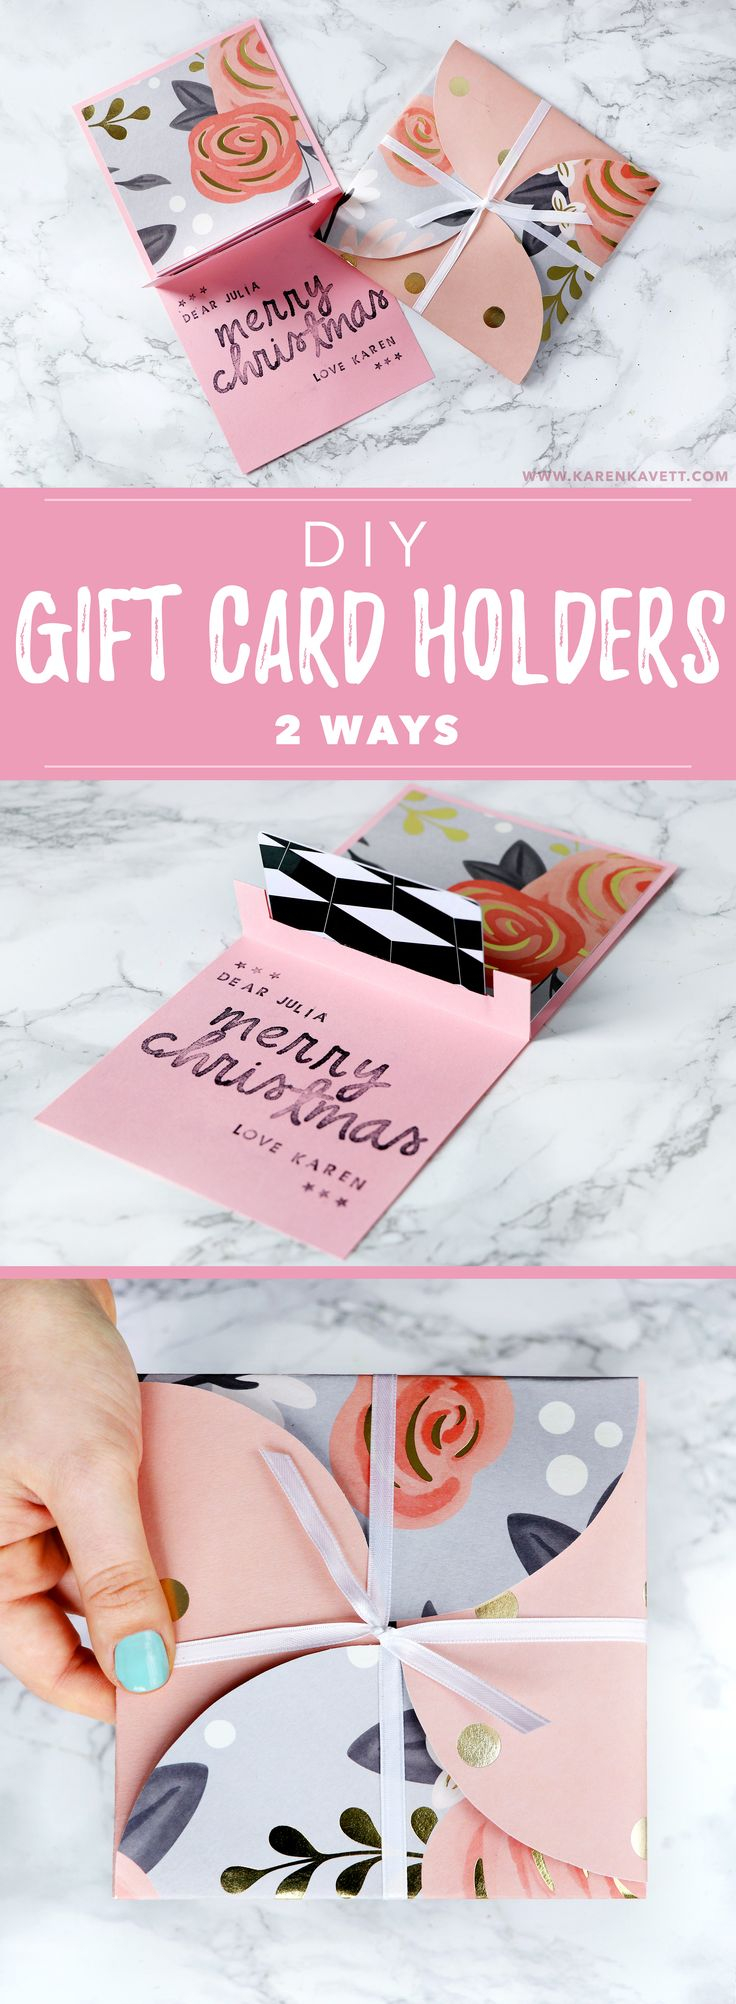 Gift Card Birthday Ideas Birthday Gifts Inspiration 2 Easy Diy Gift Card Holders For